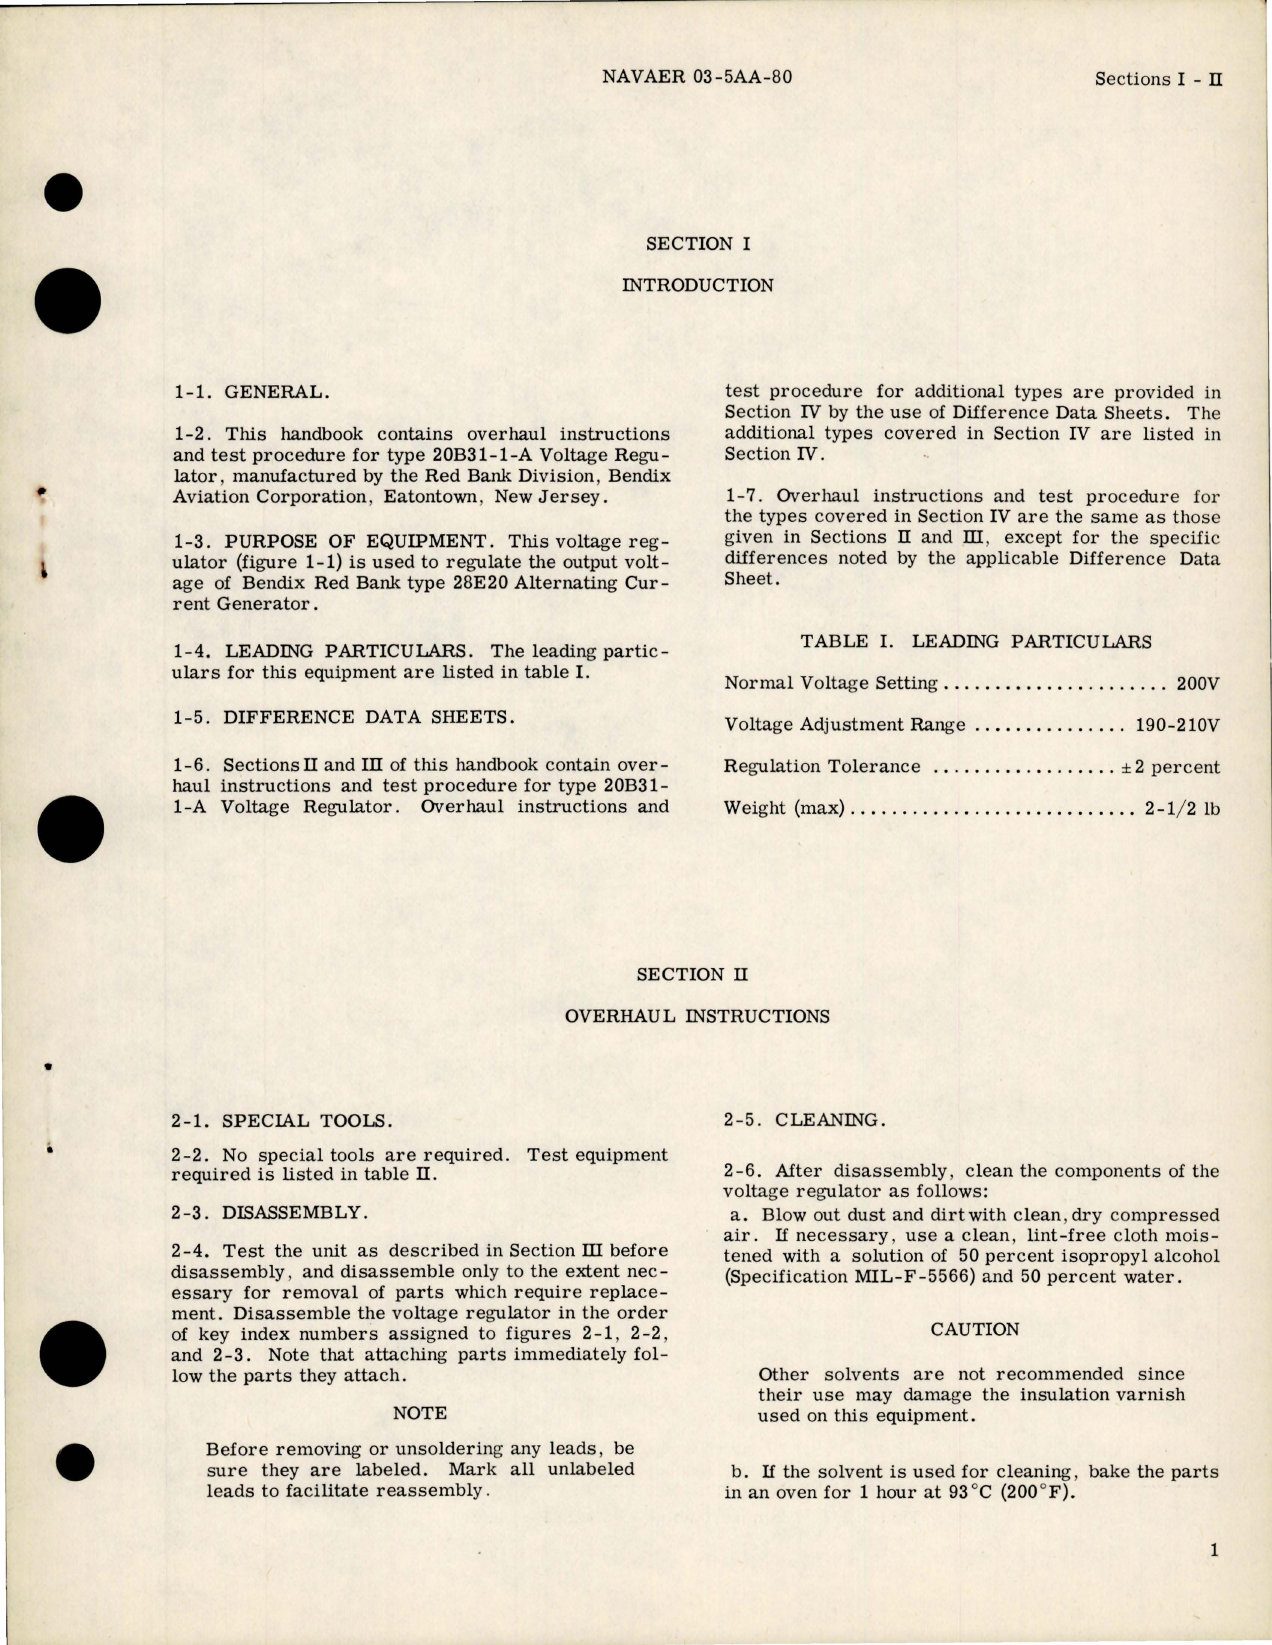 Sample page 5 from AirCorps Library document: Overhaul Instructions for Voltage Regulator - Type 20B31-1-A and 20B31-1-B 